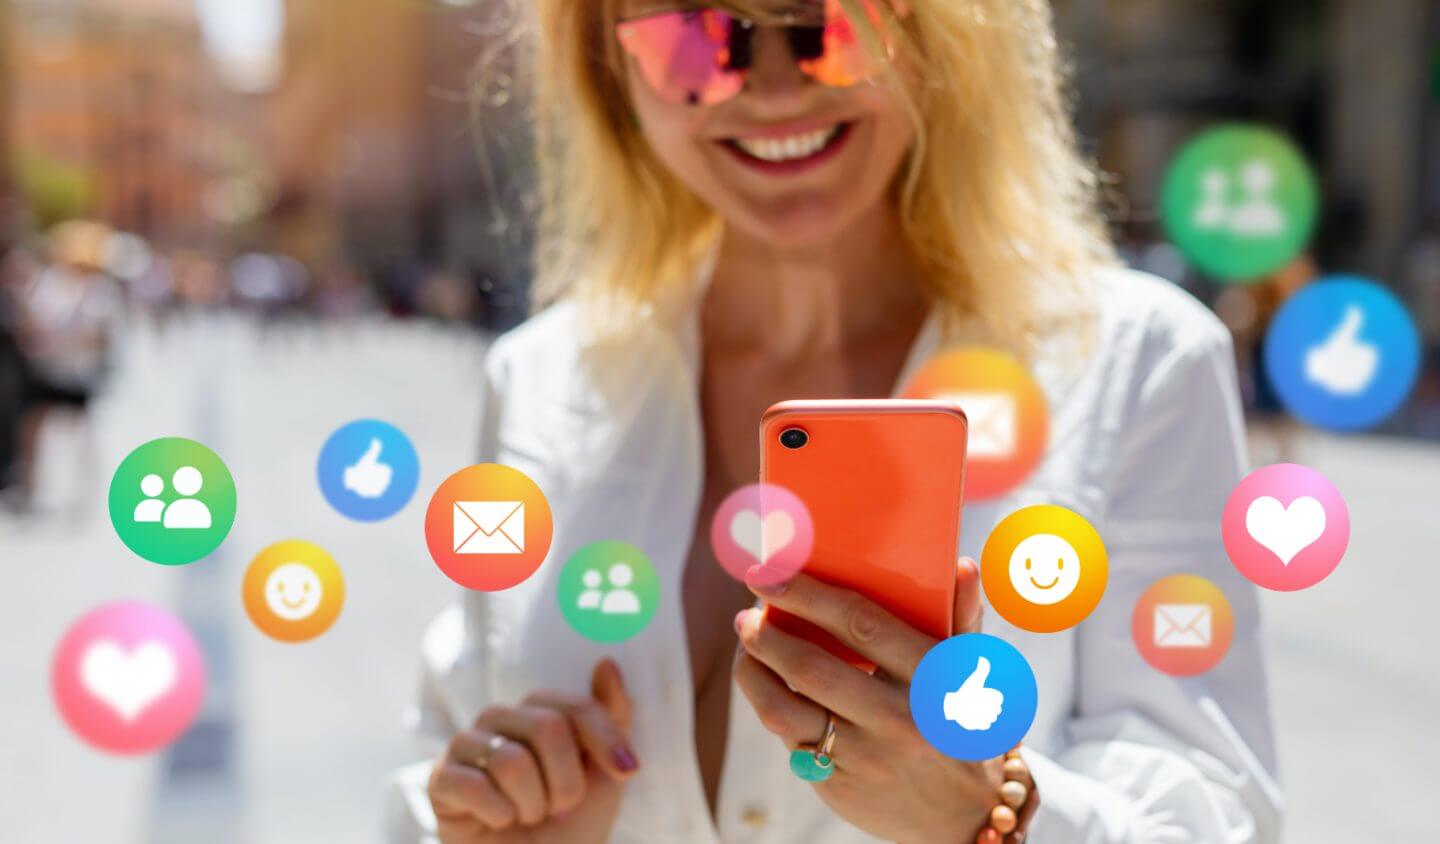 Woman looks at phone with social media icons floating around her.